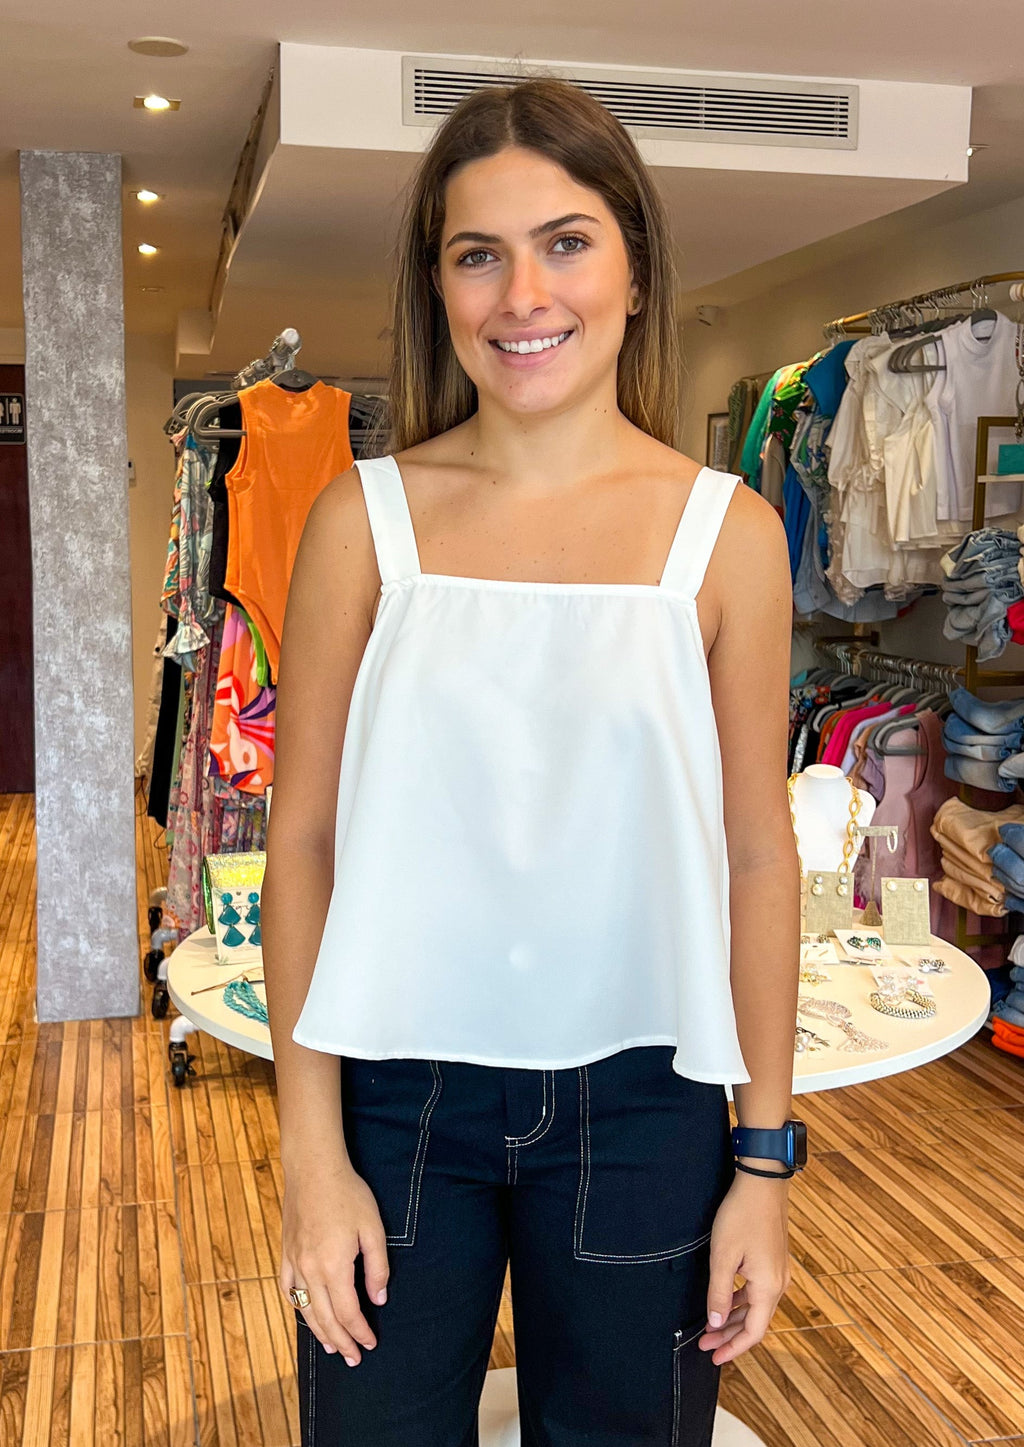 A true classic. This timeless top features a square neck that tops an A line cropped silhouette. Thicker straps have a knotted detail at the back where it meets a scoop backline. Easily wear it with your favorite bottoms and dress up the look with accessories and strappy heels.